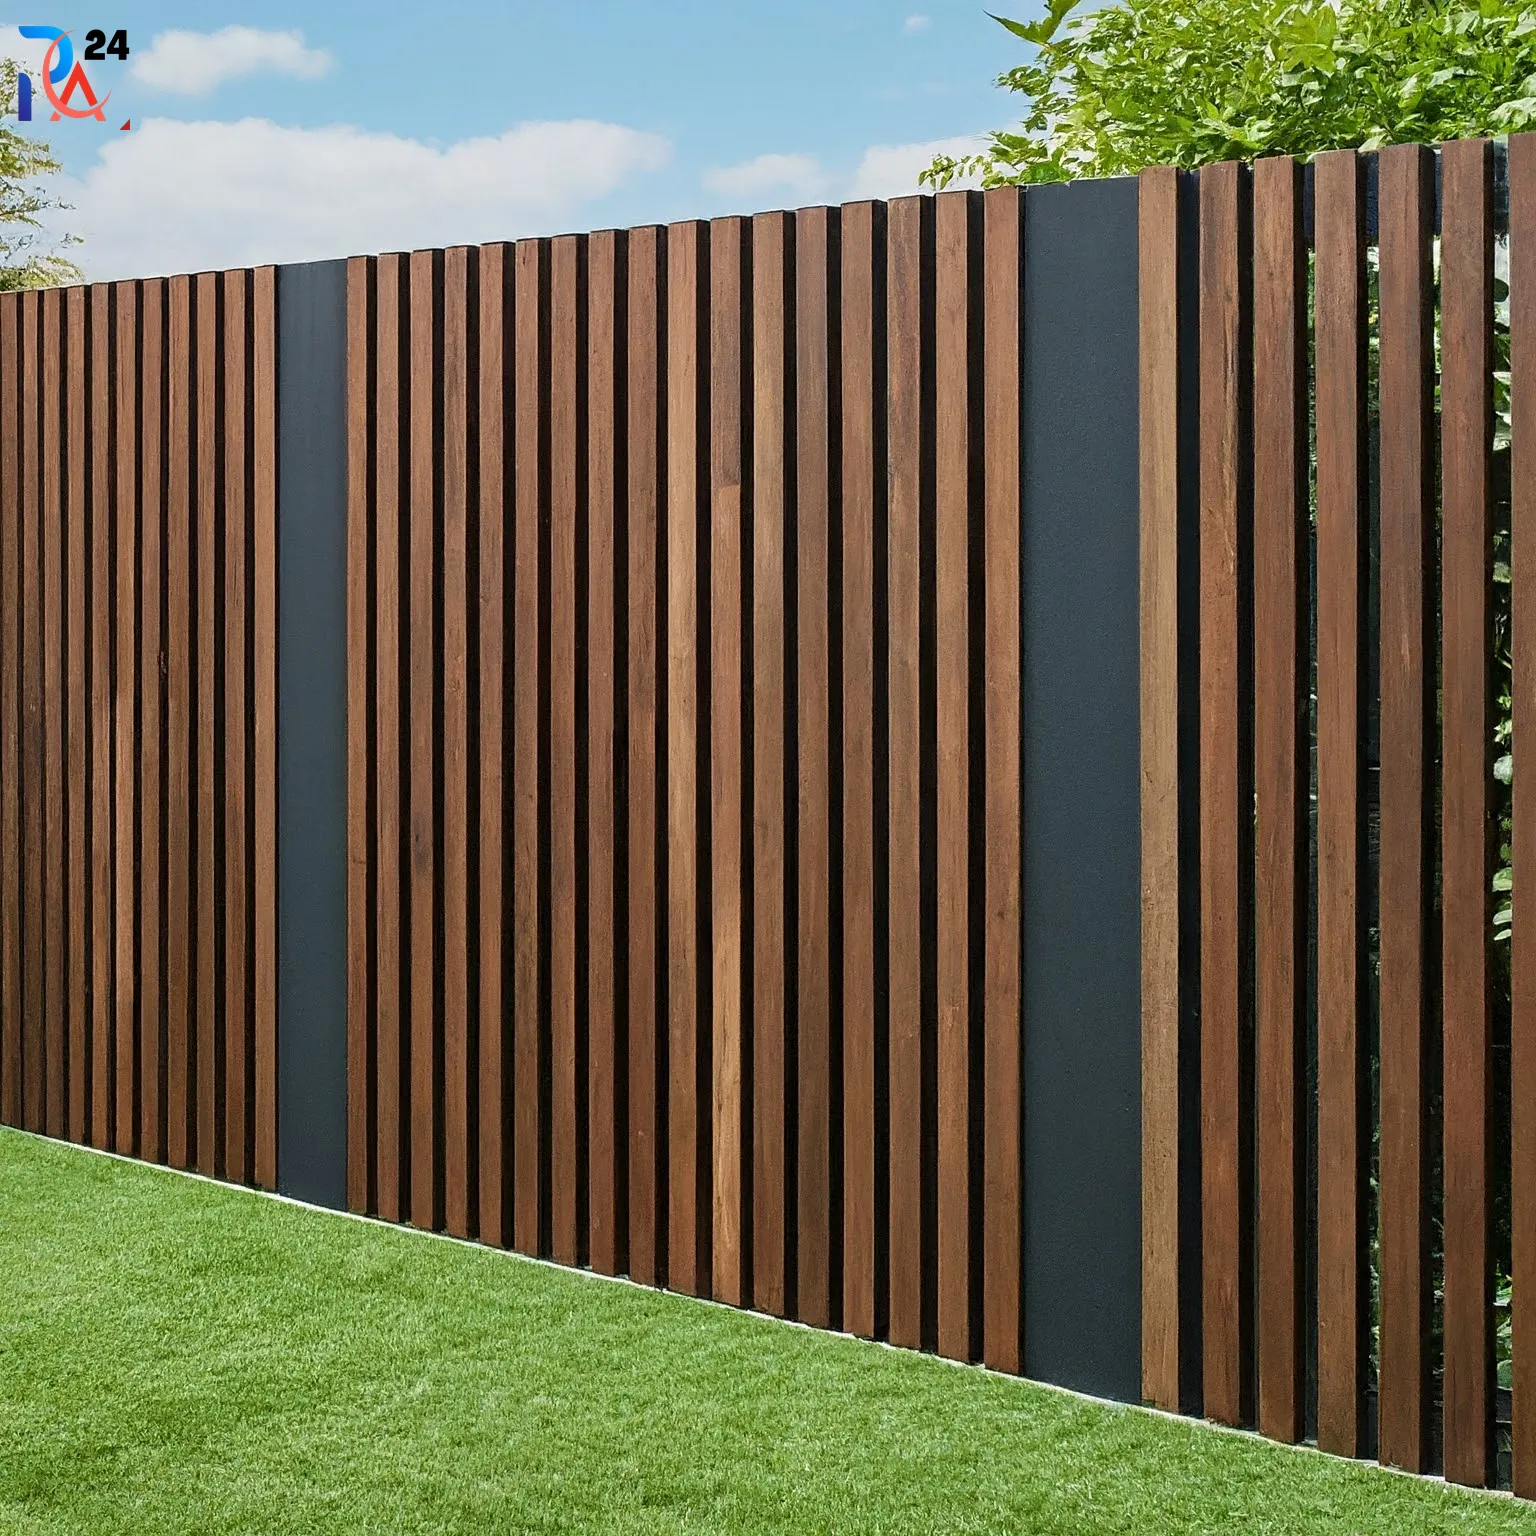 wood and wire fence ideas271